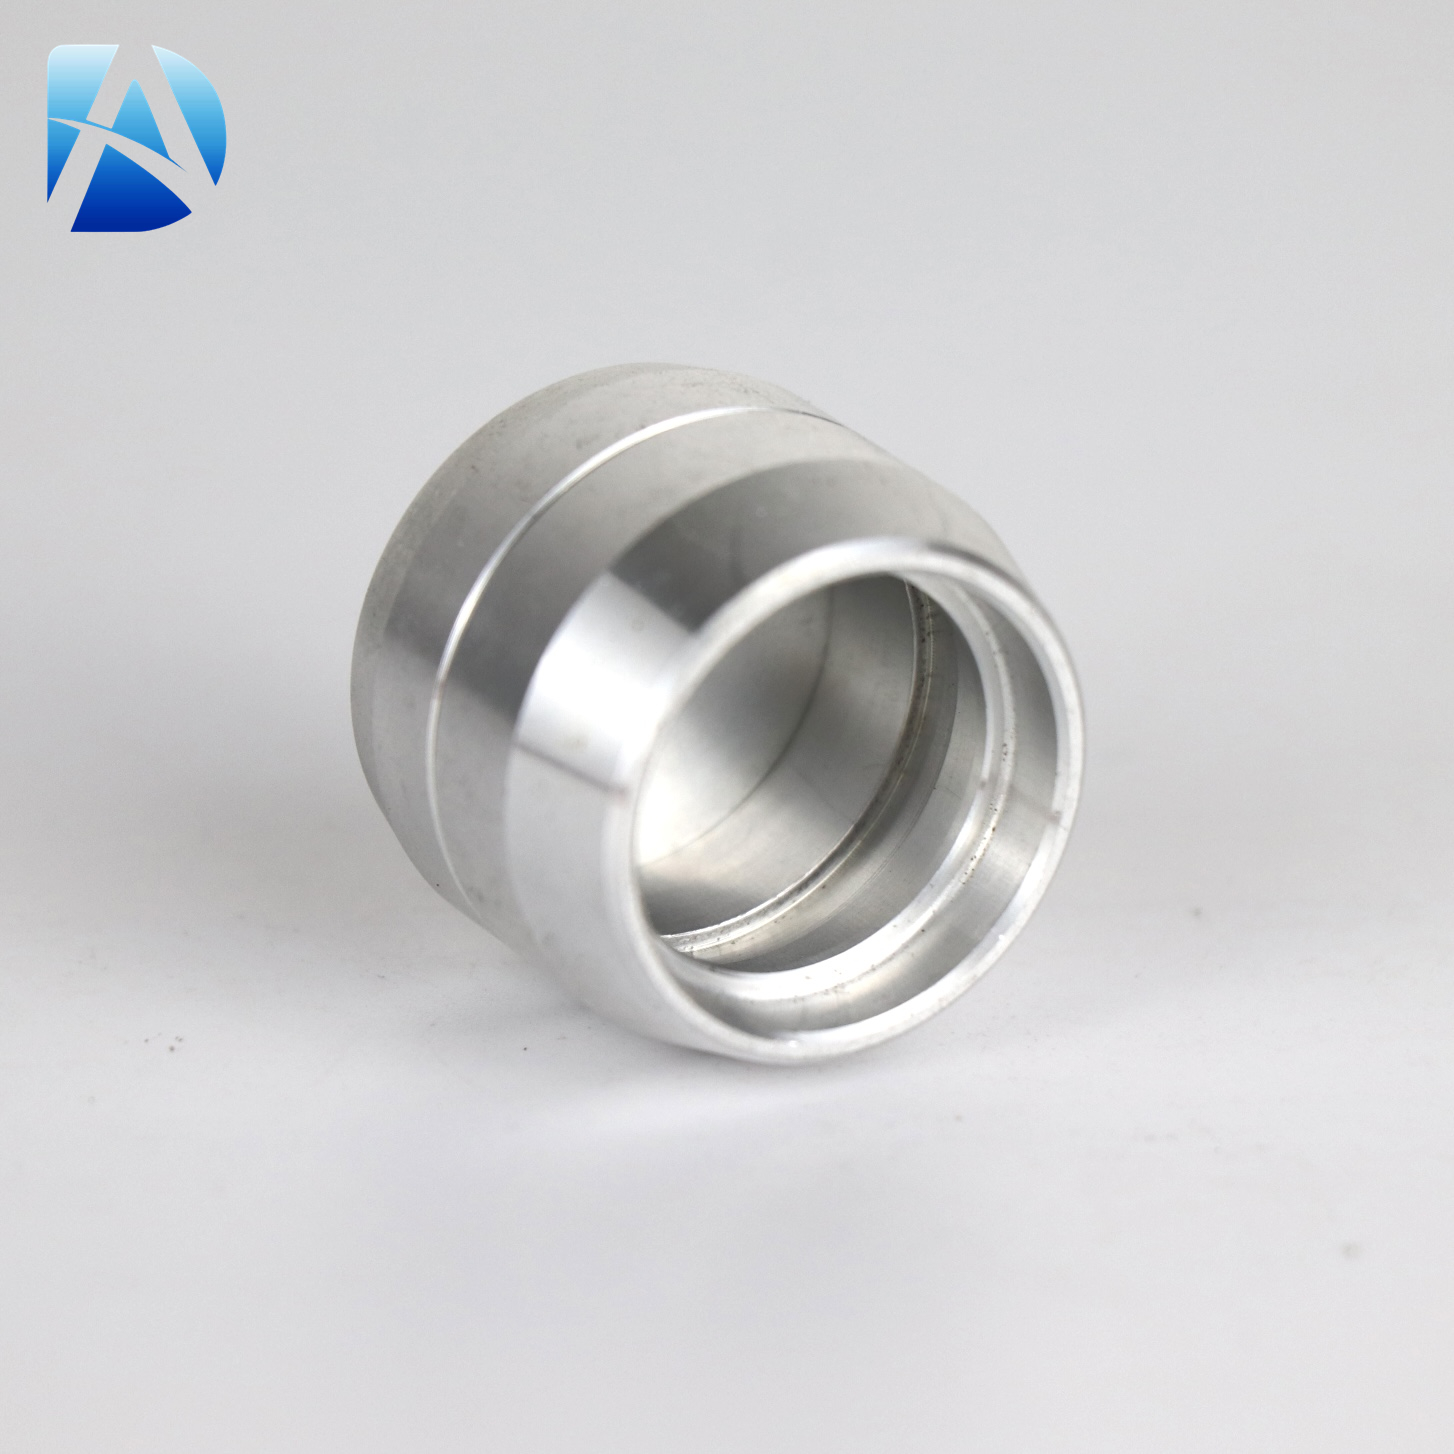 Why Choose Stainless Steel Speed Nuts? Unveiling the Durability and Corrosion Resistance.